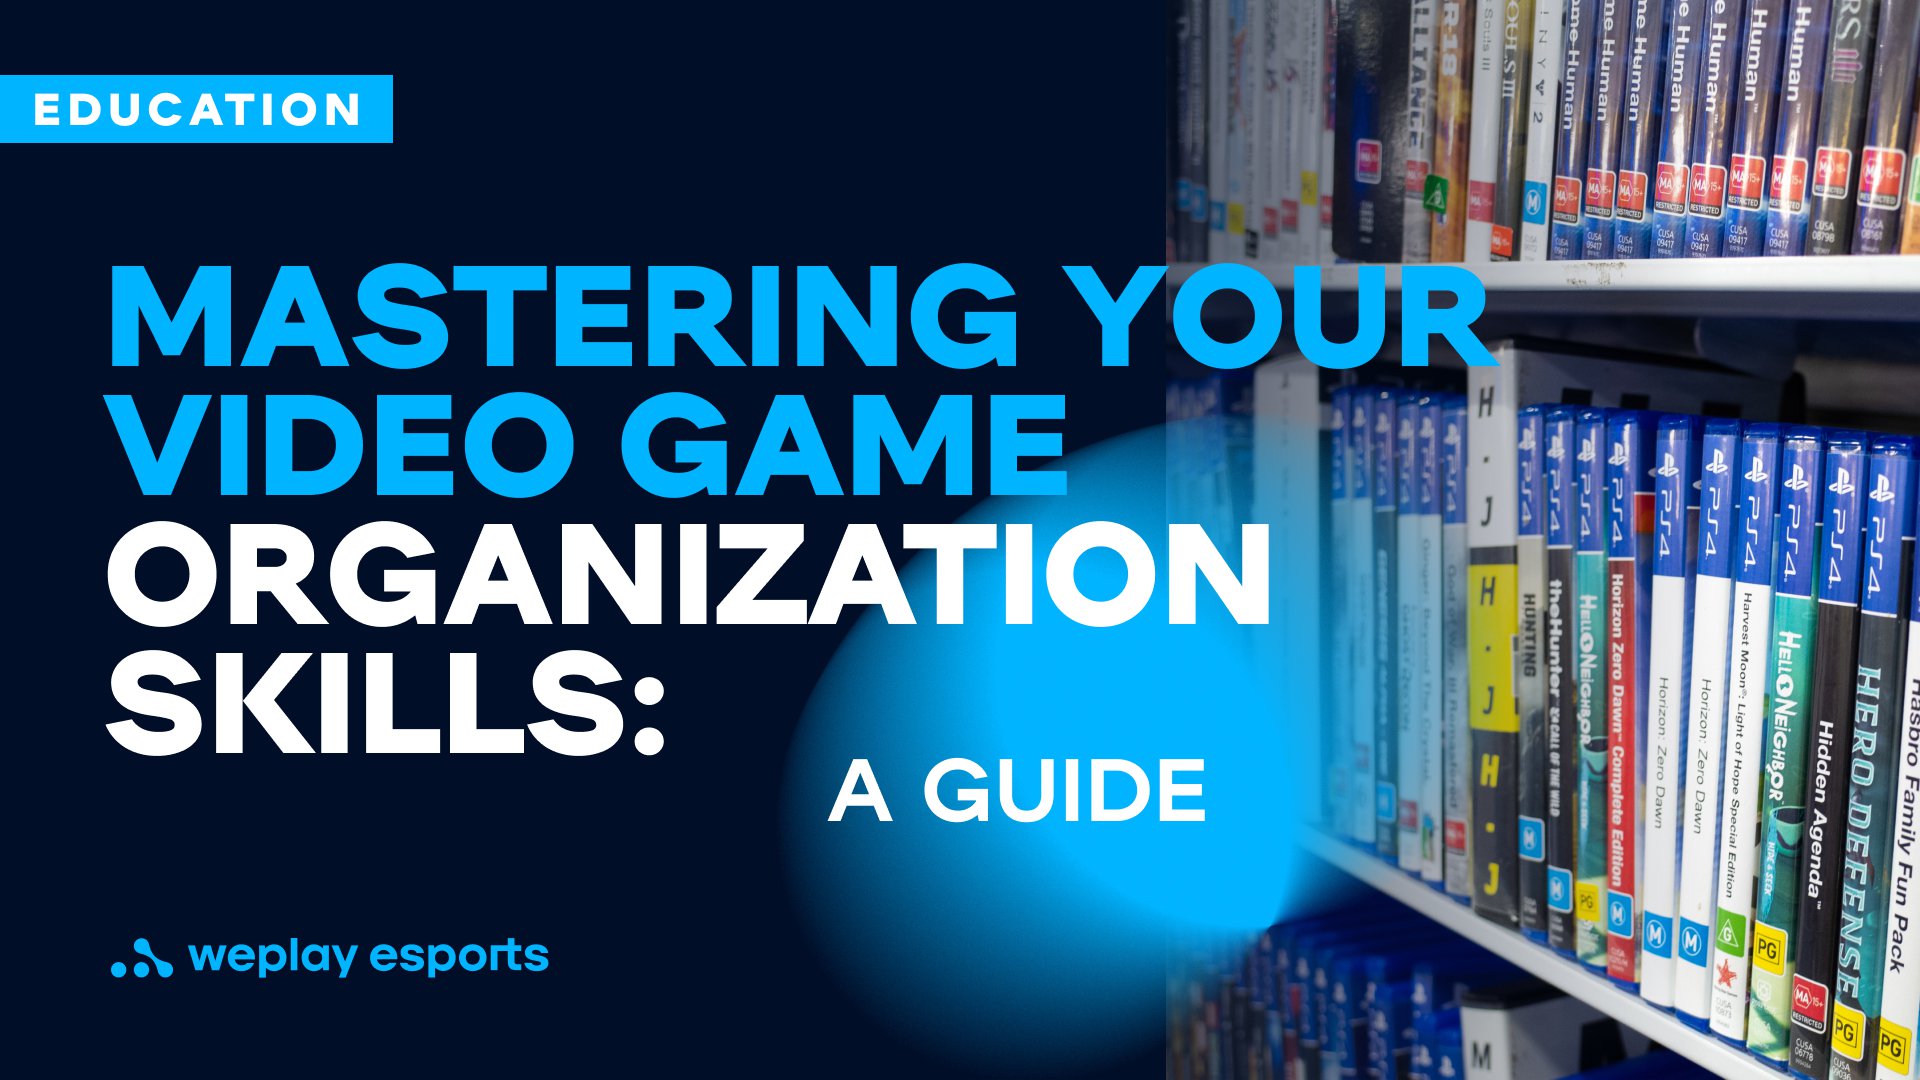 Mastering your video game organization skills: a guide. Credit: WePlay Holding